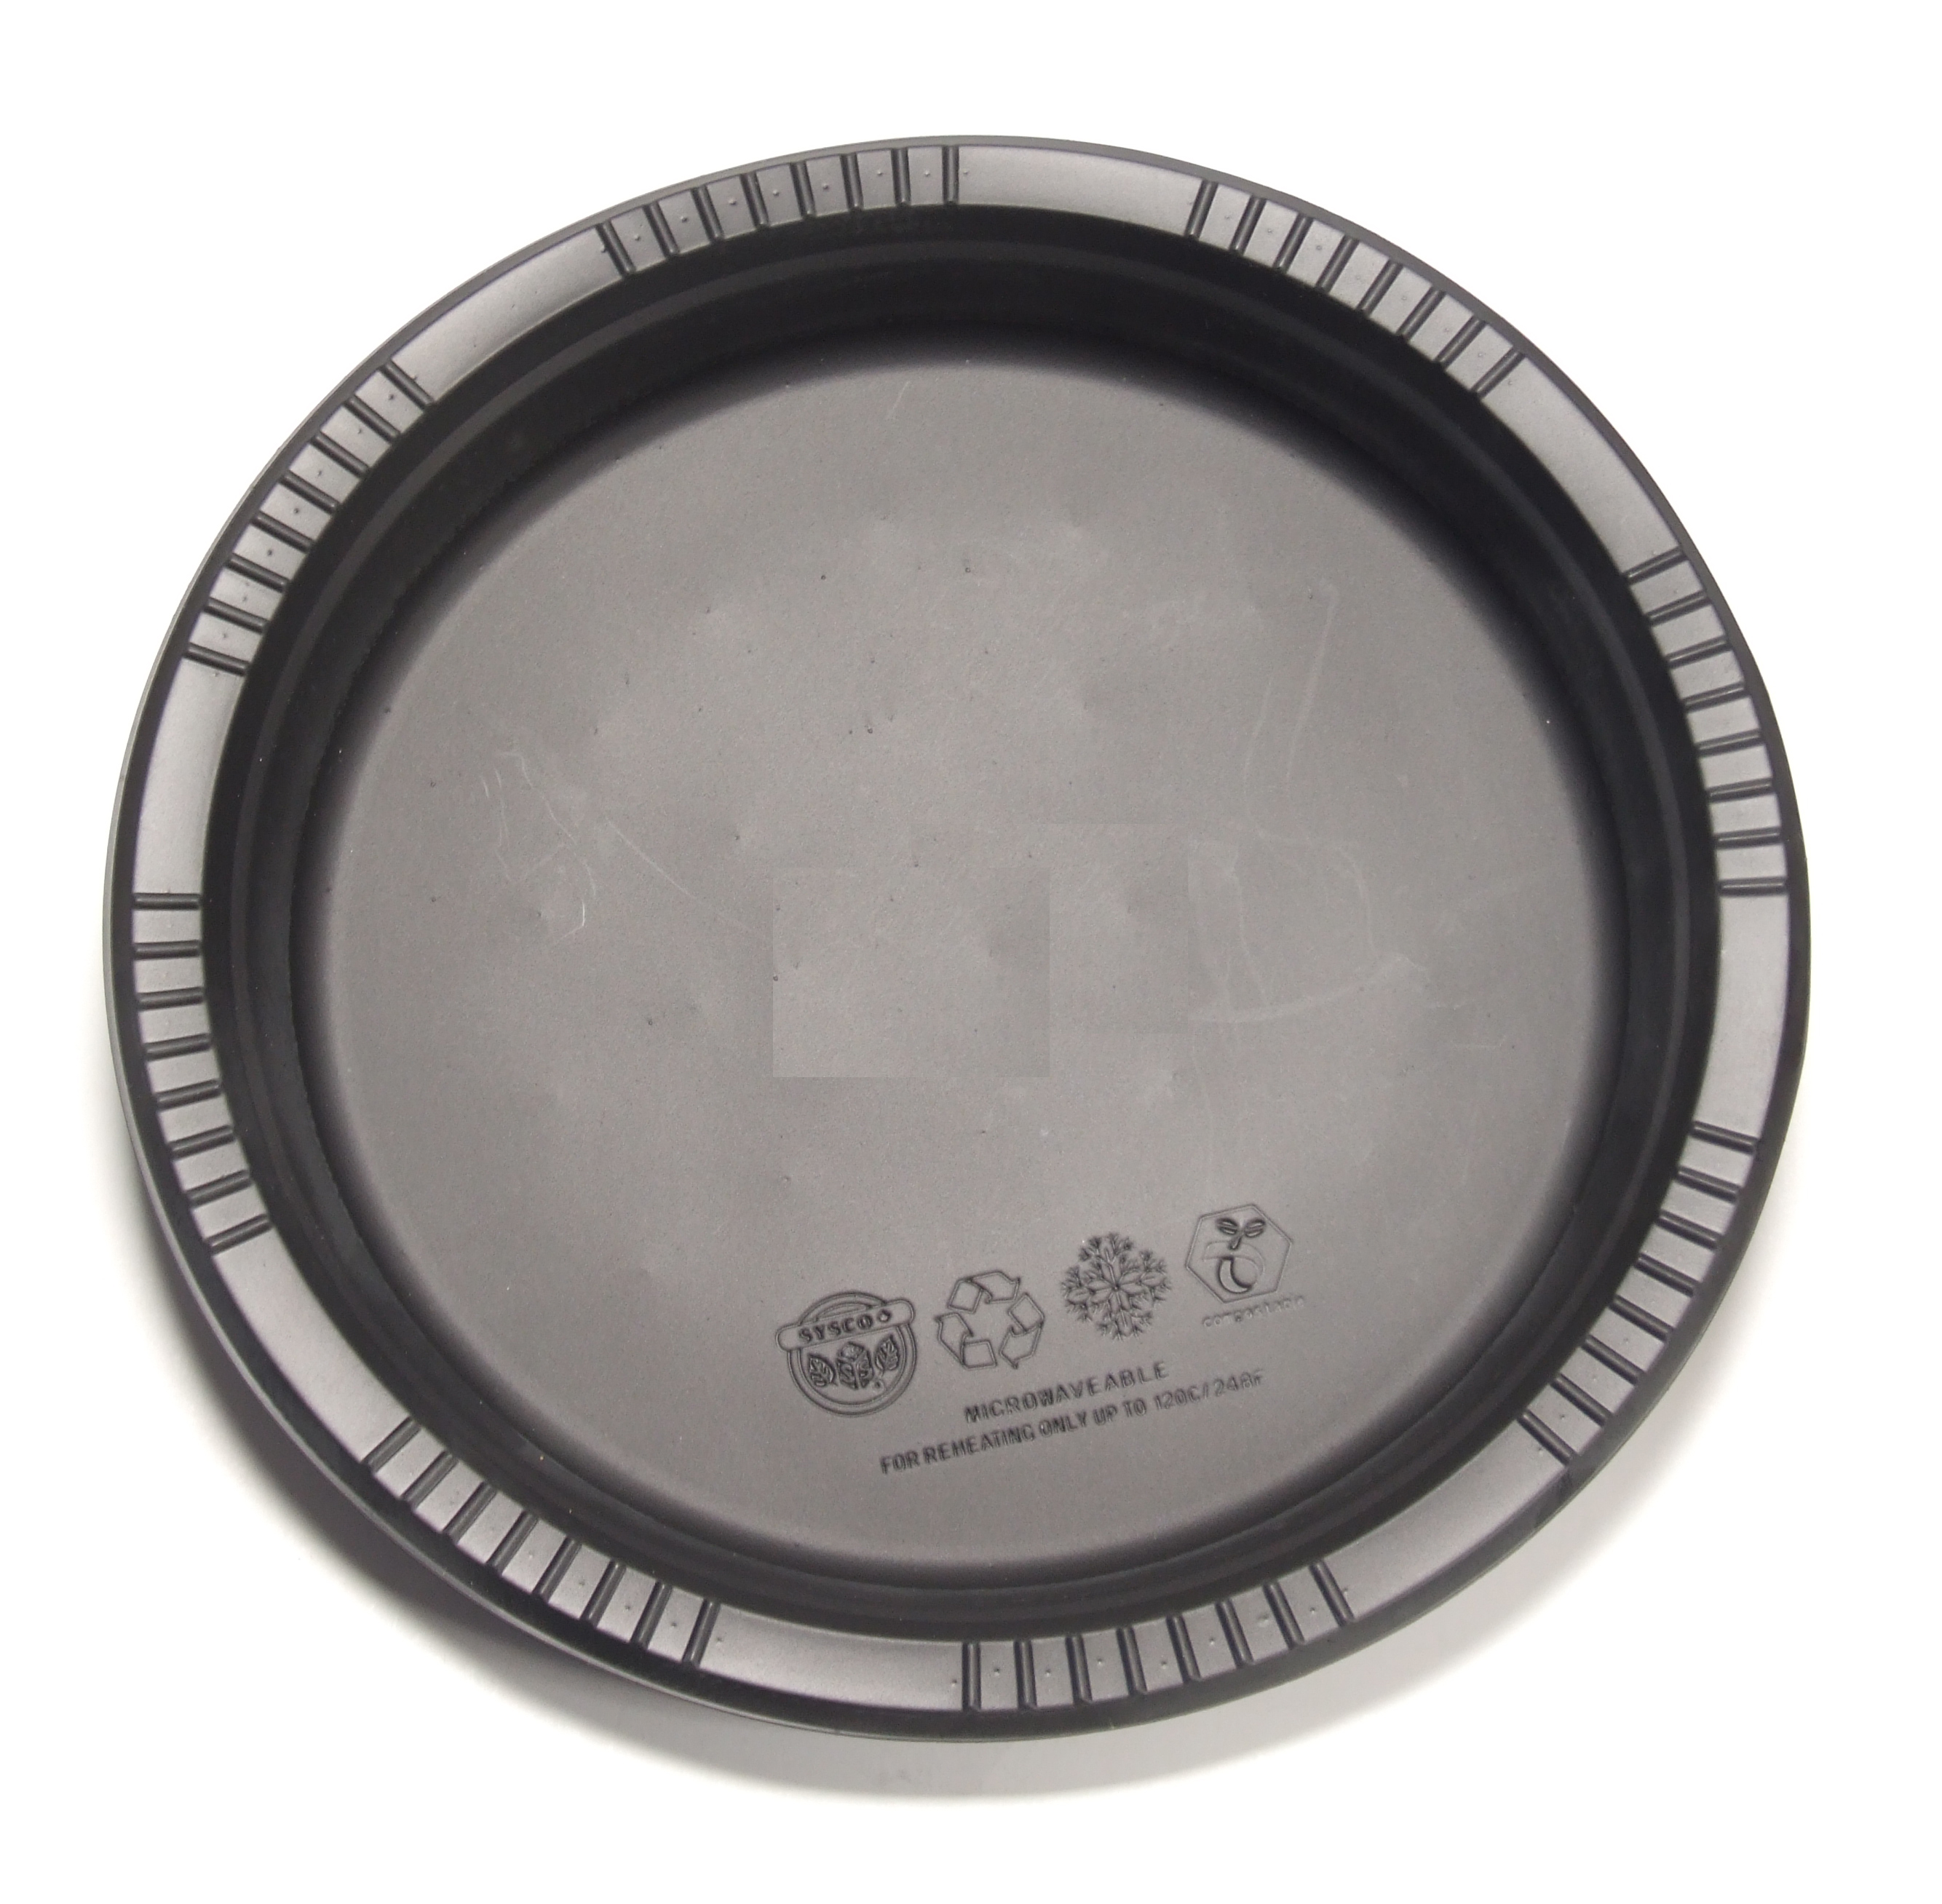 Buy Cornstarch Dinnerware Plates from VLB Marketing, it is microwave safe, washable and fully compostable with food waste in 30-60 days in commercial facilities.